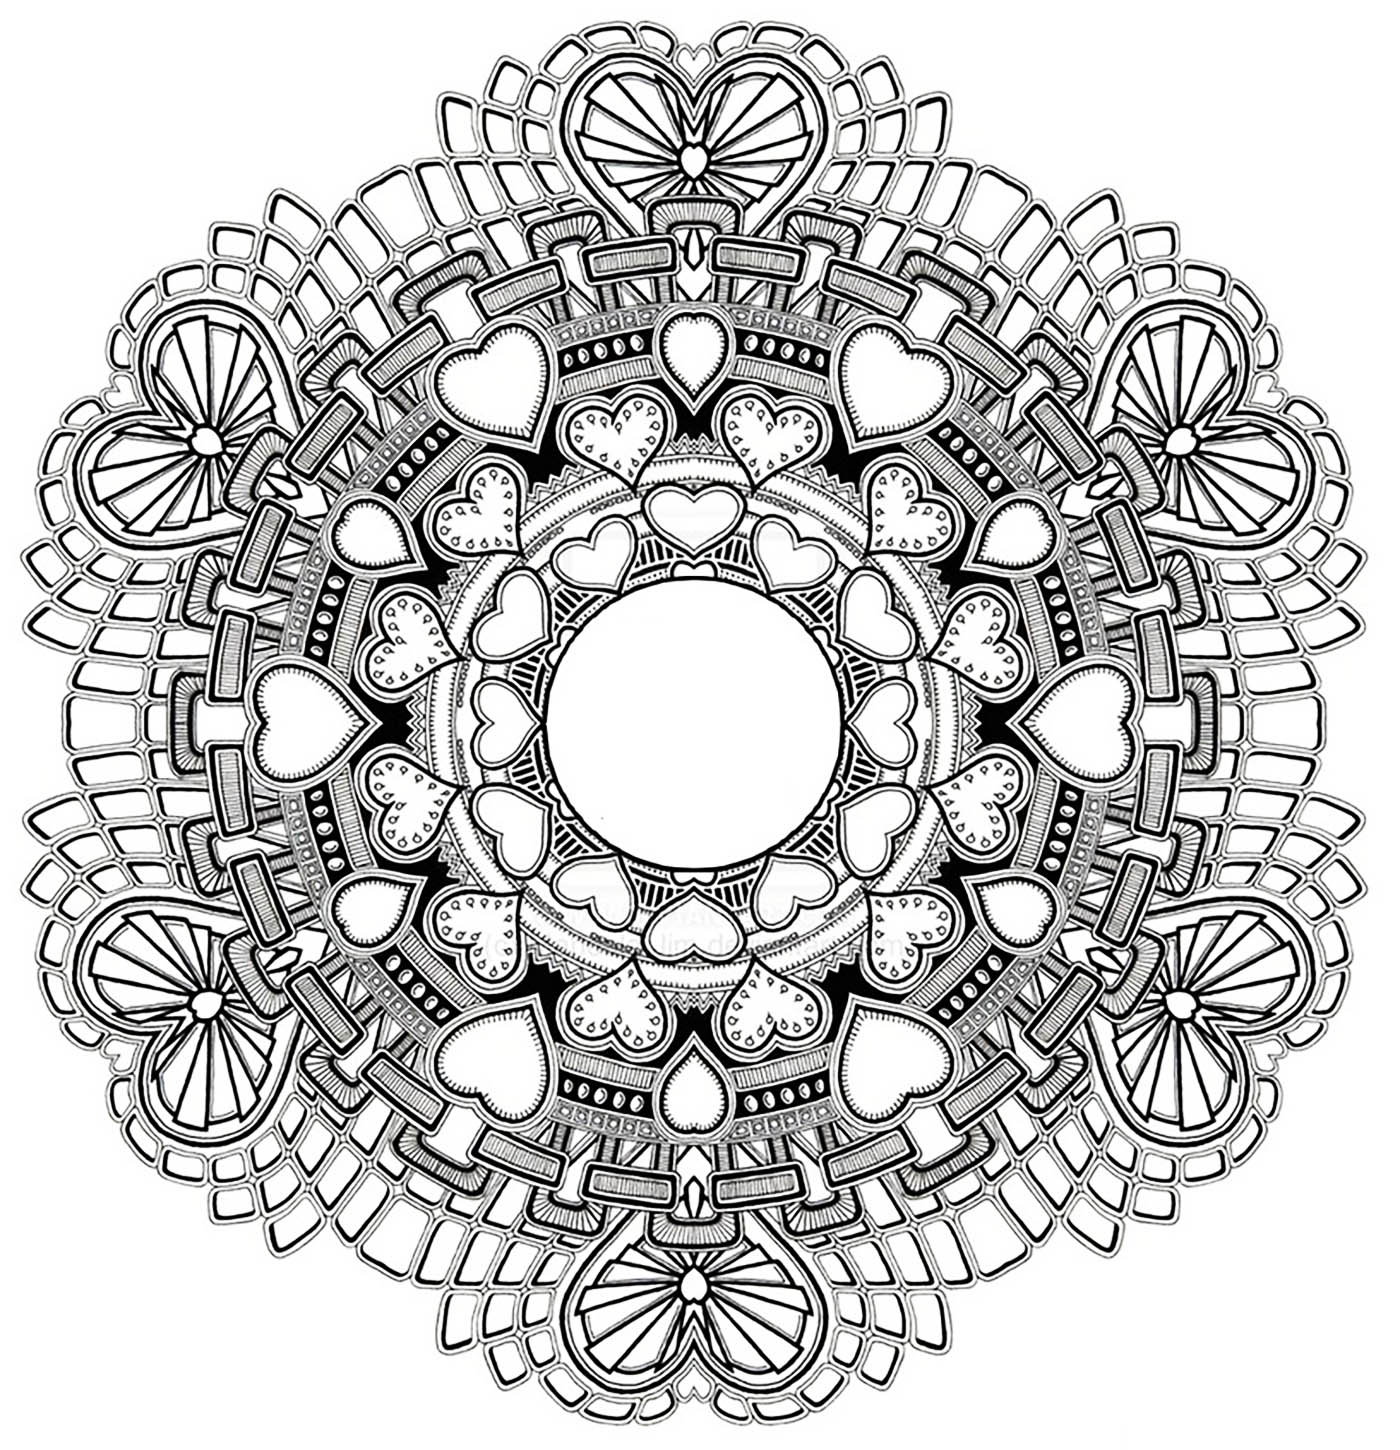 Mandala to download in pdf 3 - M&alas Adult Coloring Pages